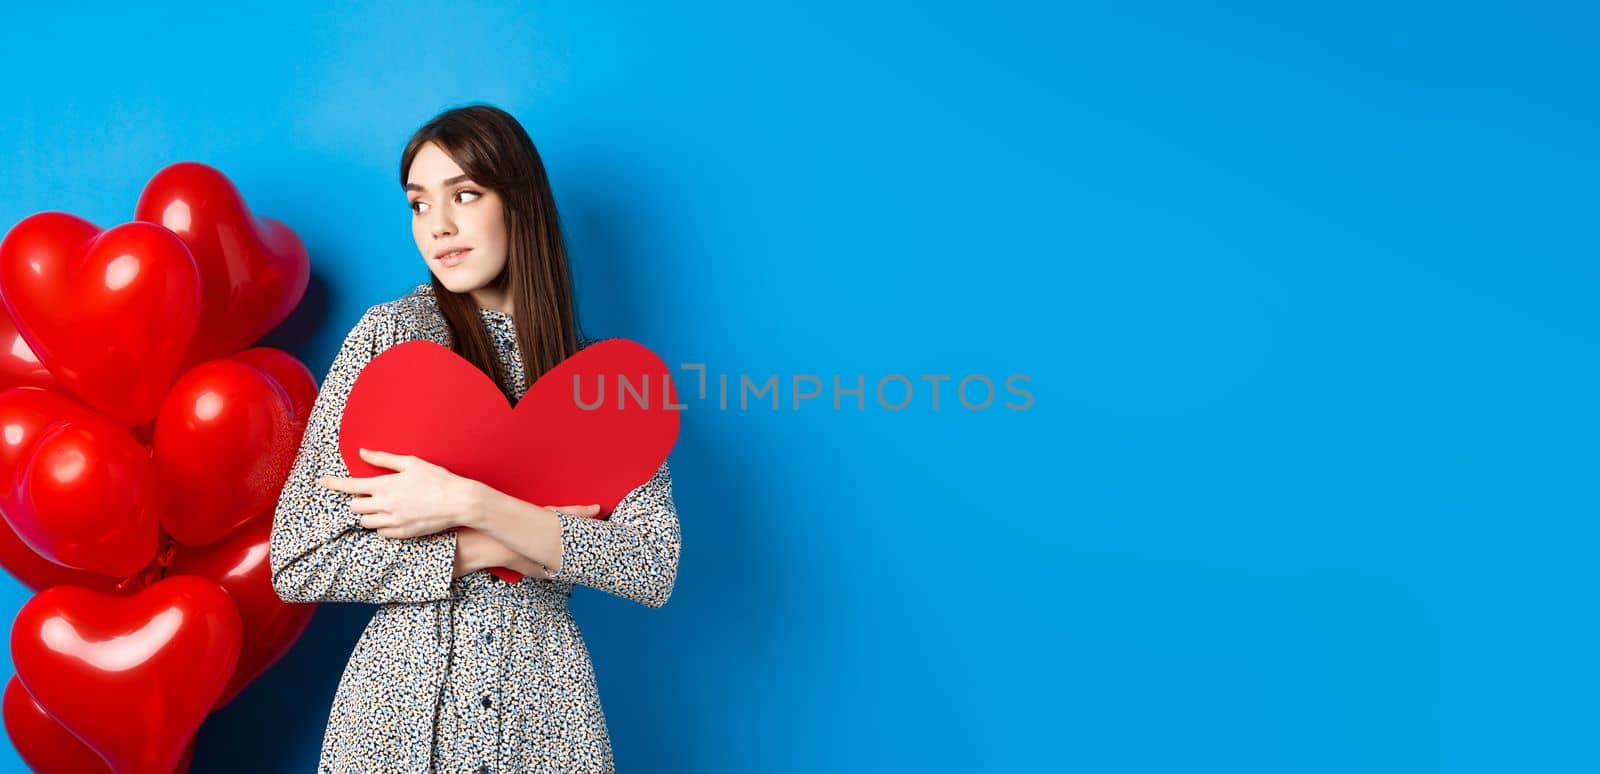 Valentines day. Beautiful and romantic woman looking pensive at balloons, hugging big red heart and smiling, waiting for love, blue background.